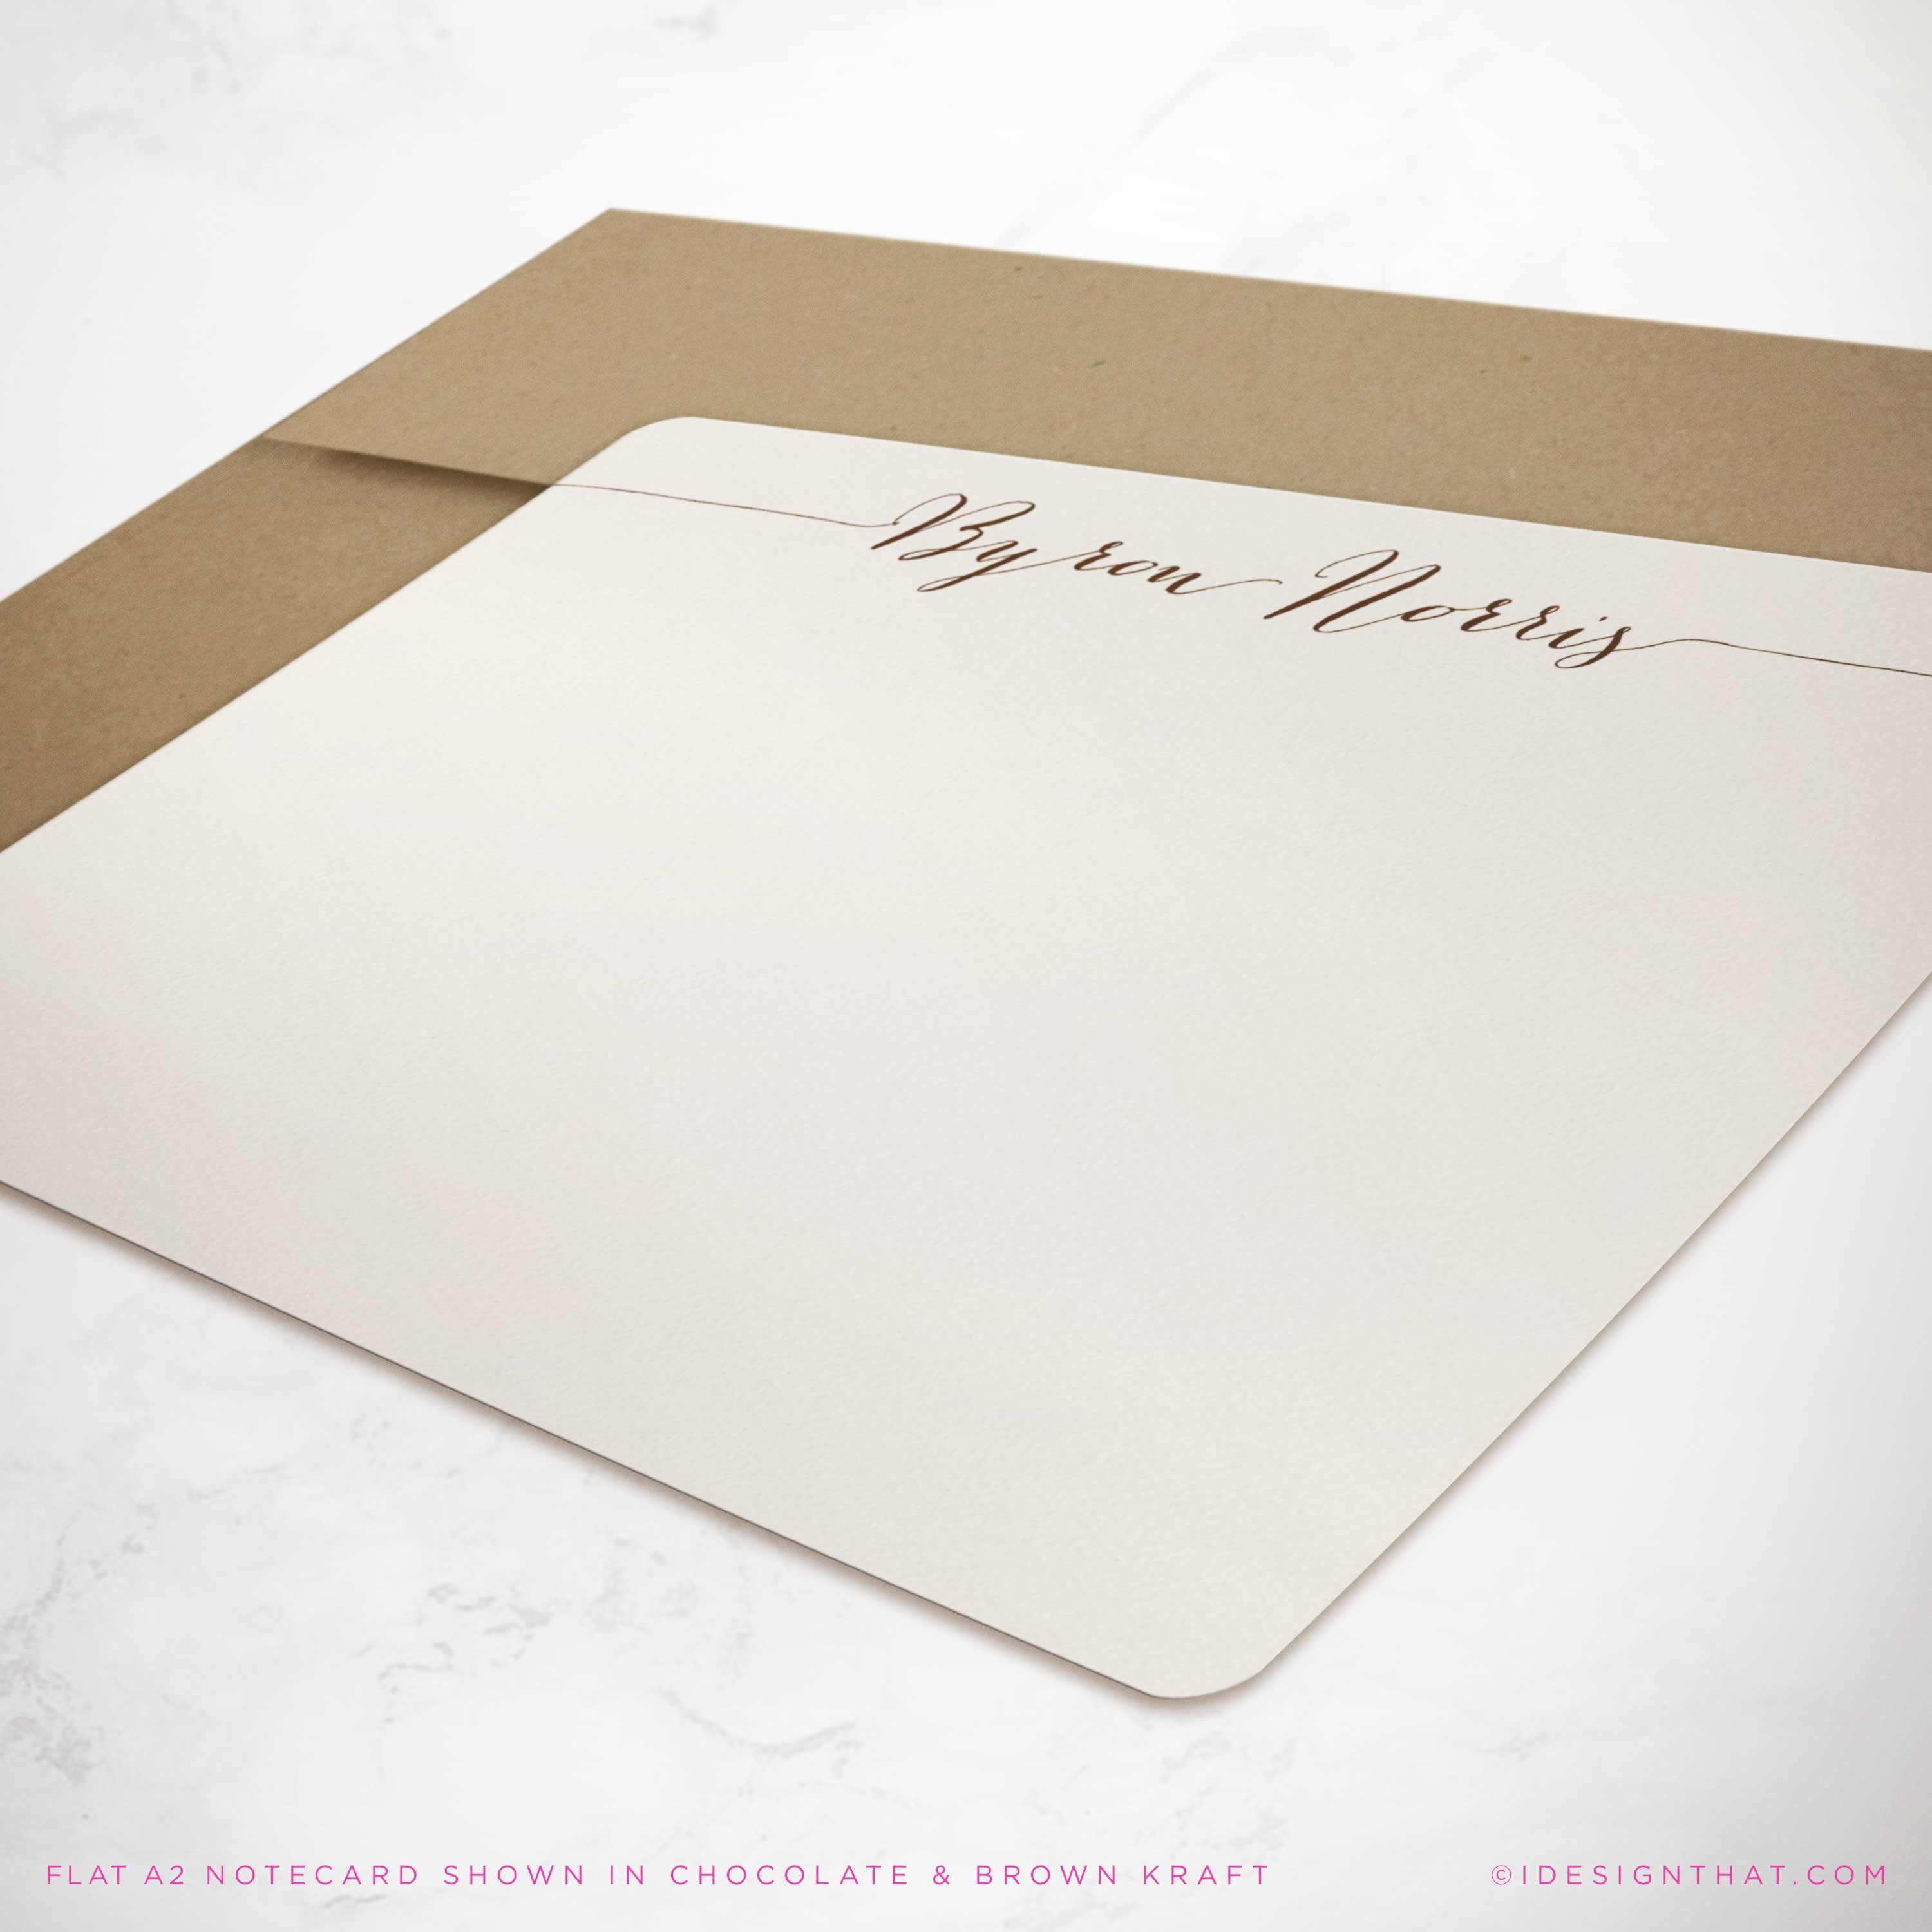 Personalized Stationary Note Cards and Envelope Set Personalized Stationary for Women Personalized FLAT Note cards with Envelopes Your Choice of Colors and Quantity 